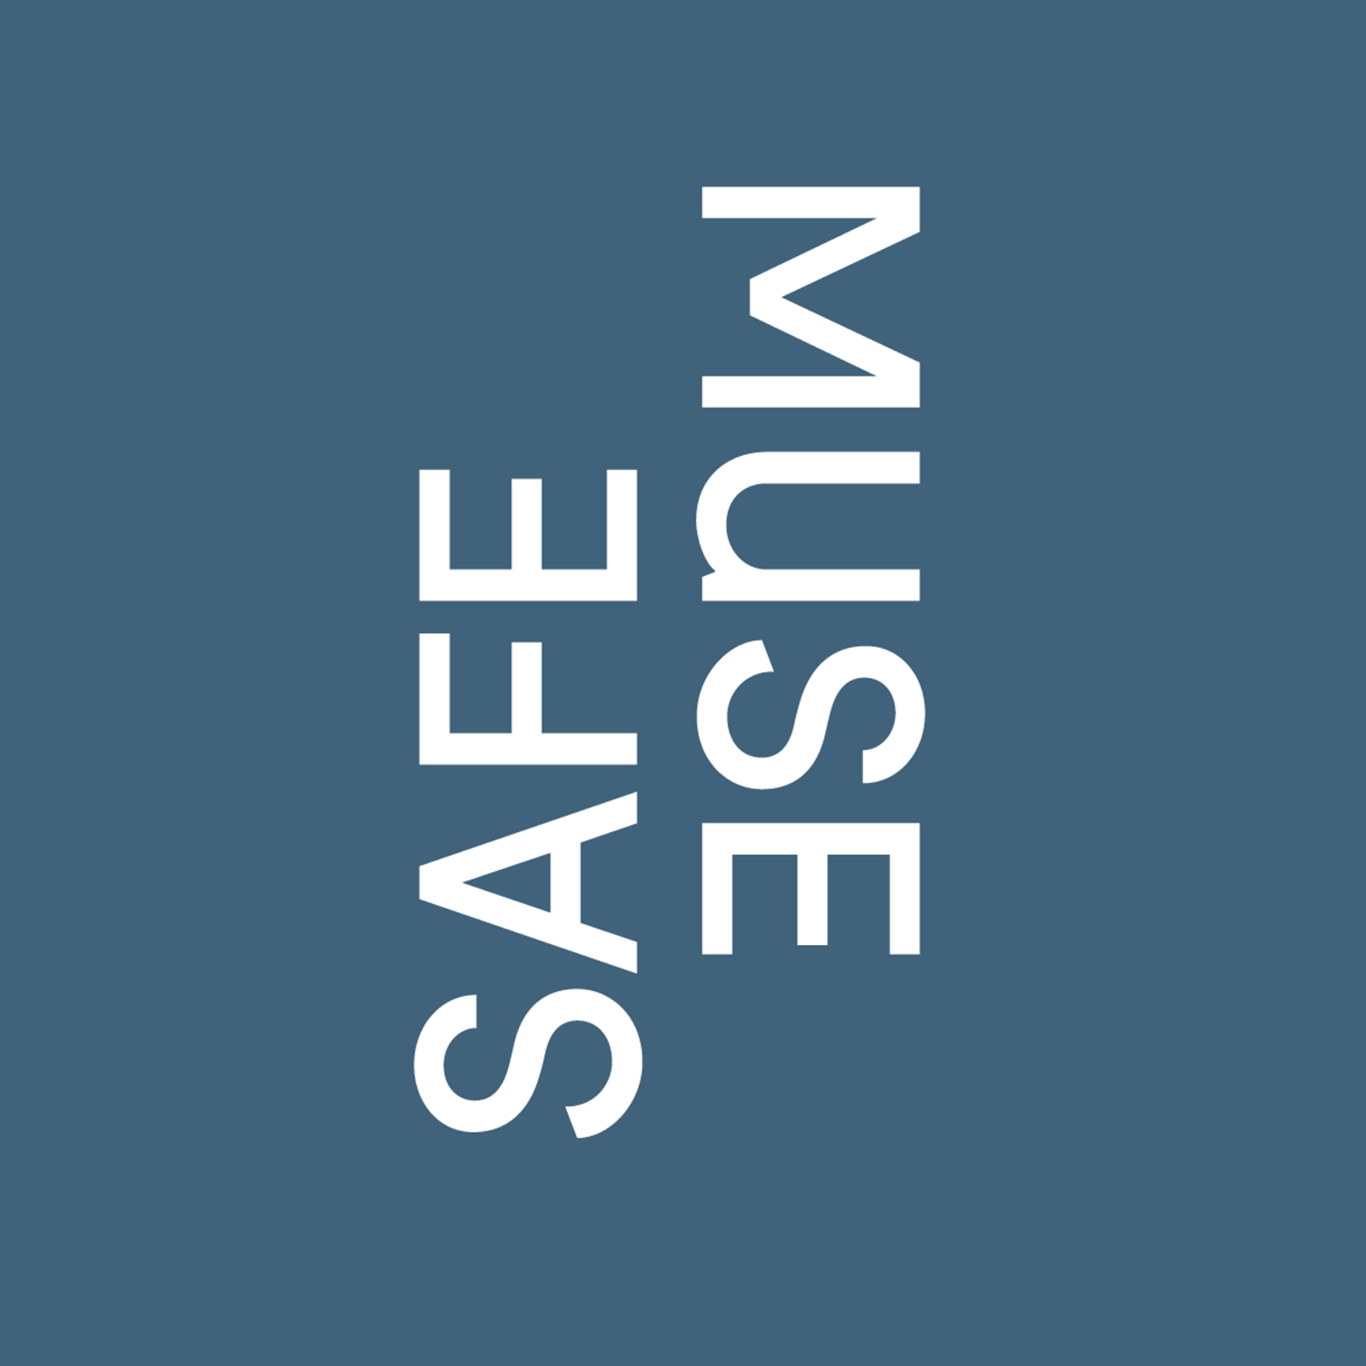 Dark blue square with white text: Safe Muse in white.